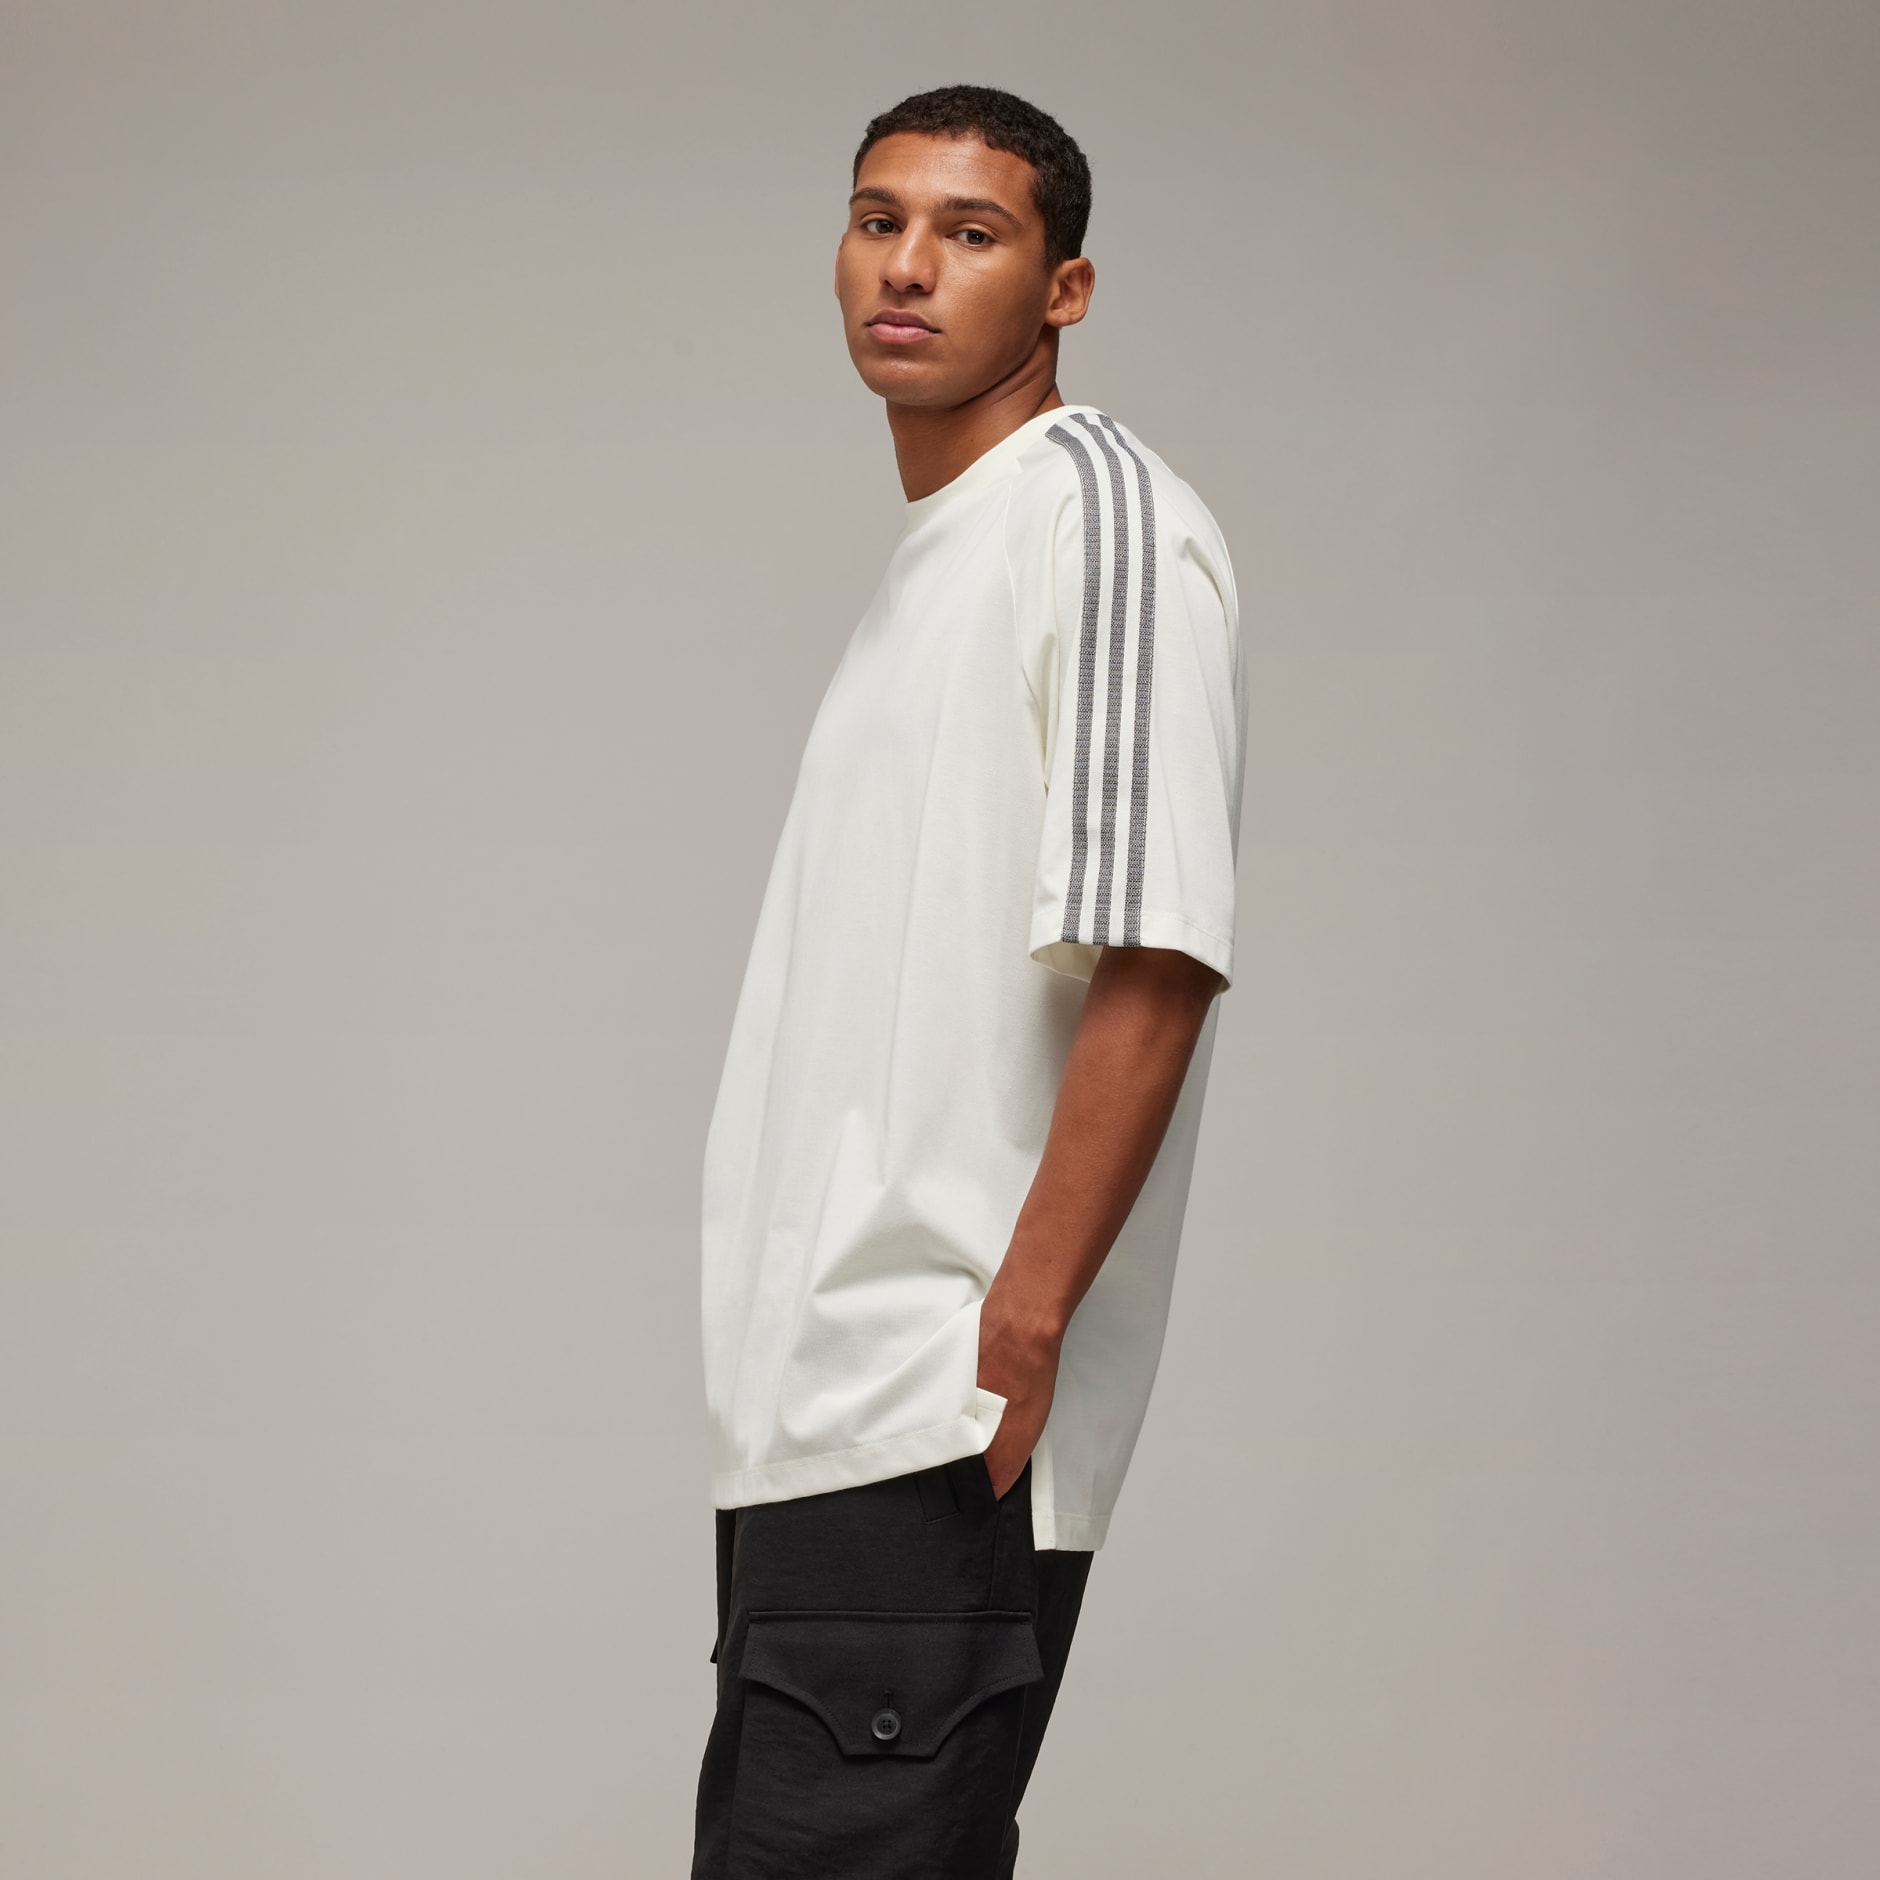 All products - Y-3 3-Stripes Short Sleeve Tee - White | adidas South Africa